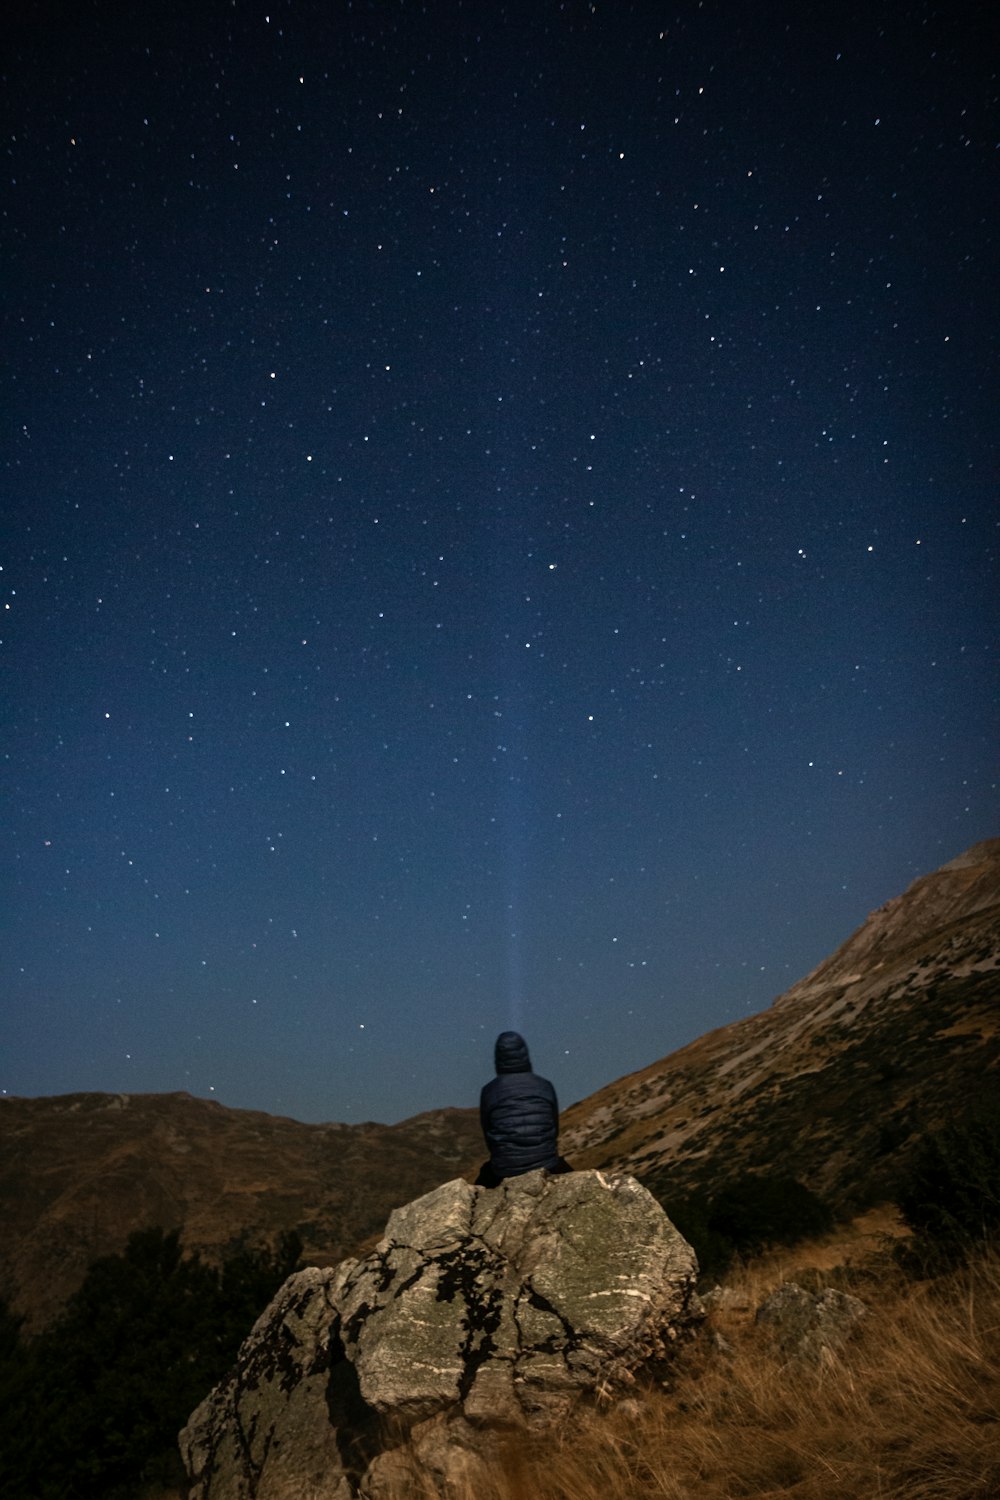 a person sitting on top of a rock under a night sky